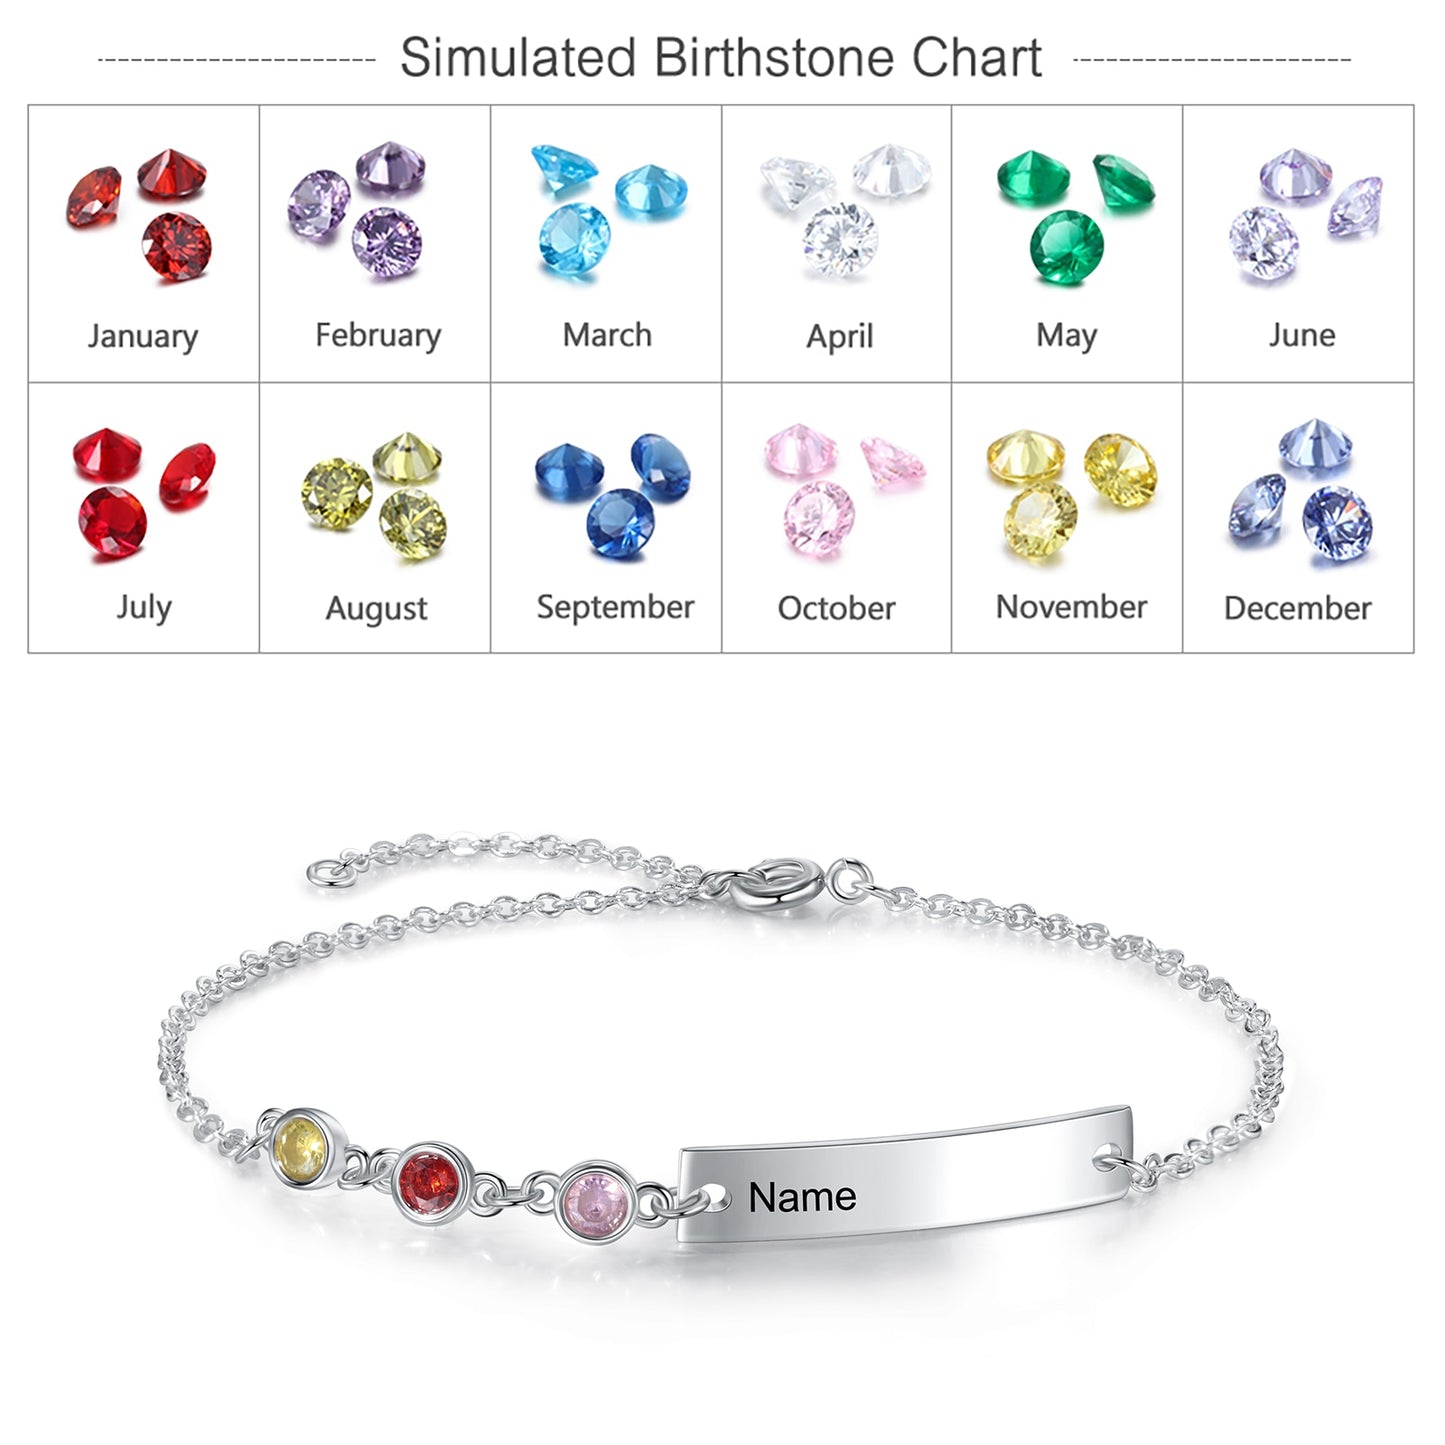 Personalized Name Bar Bracelets with 3 Birthstones